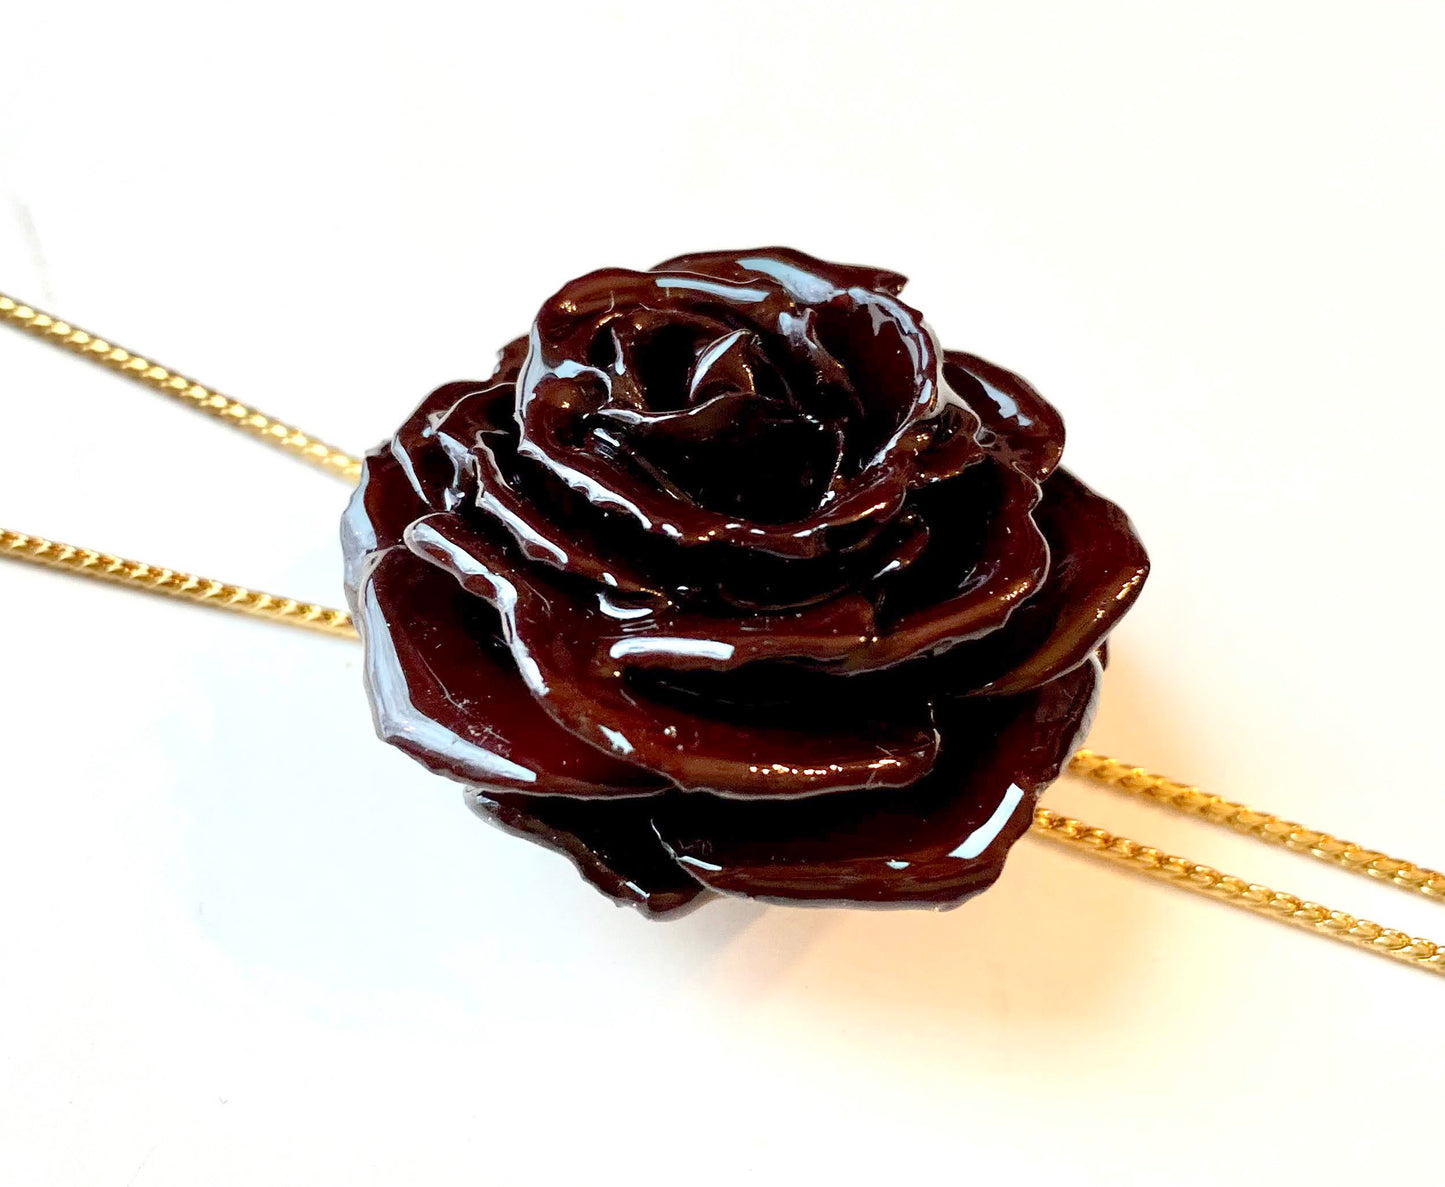 Mini Rose Mini 1.5-2.25 inch Pendant Necklace 18 inch Gold Plated 24K (Red Plum)